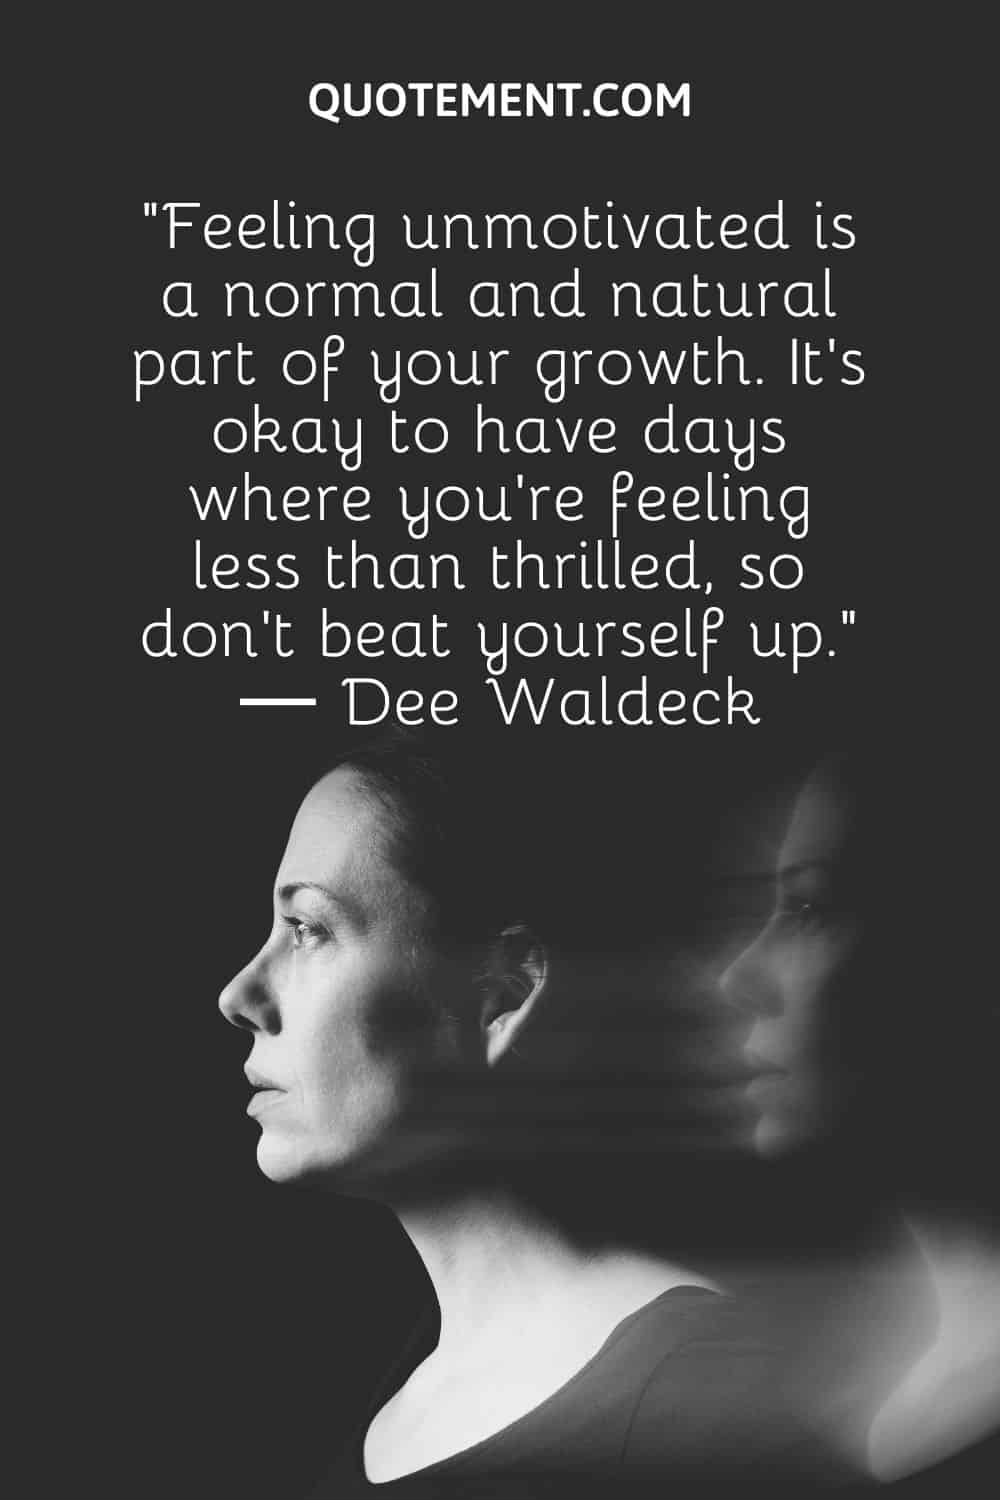 “Feeling unmotivated is a normal and natural part of your growth. It’s okay to have days where you’re feeling less than thrilled, so don't beat yourself up.” ― Dee Waldeck